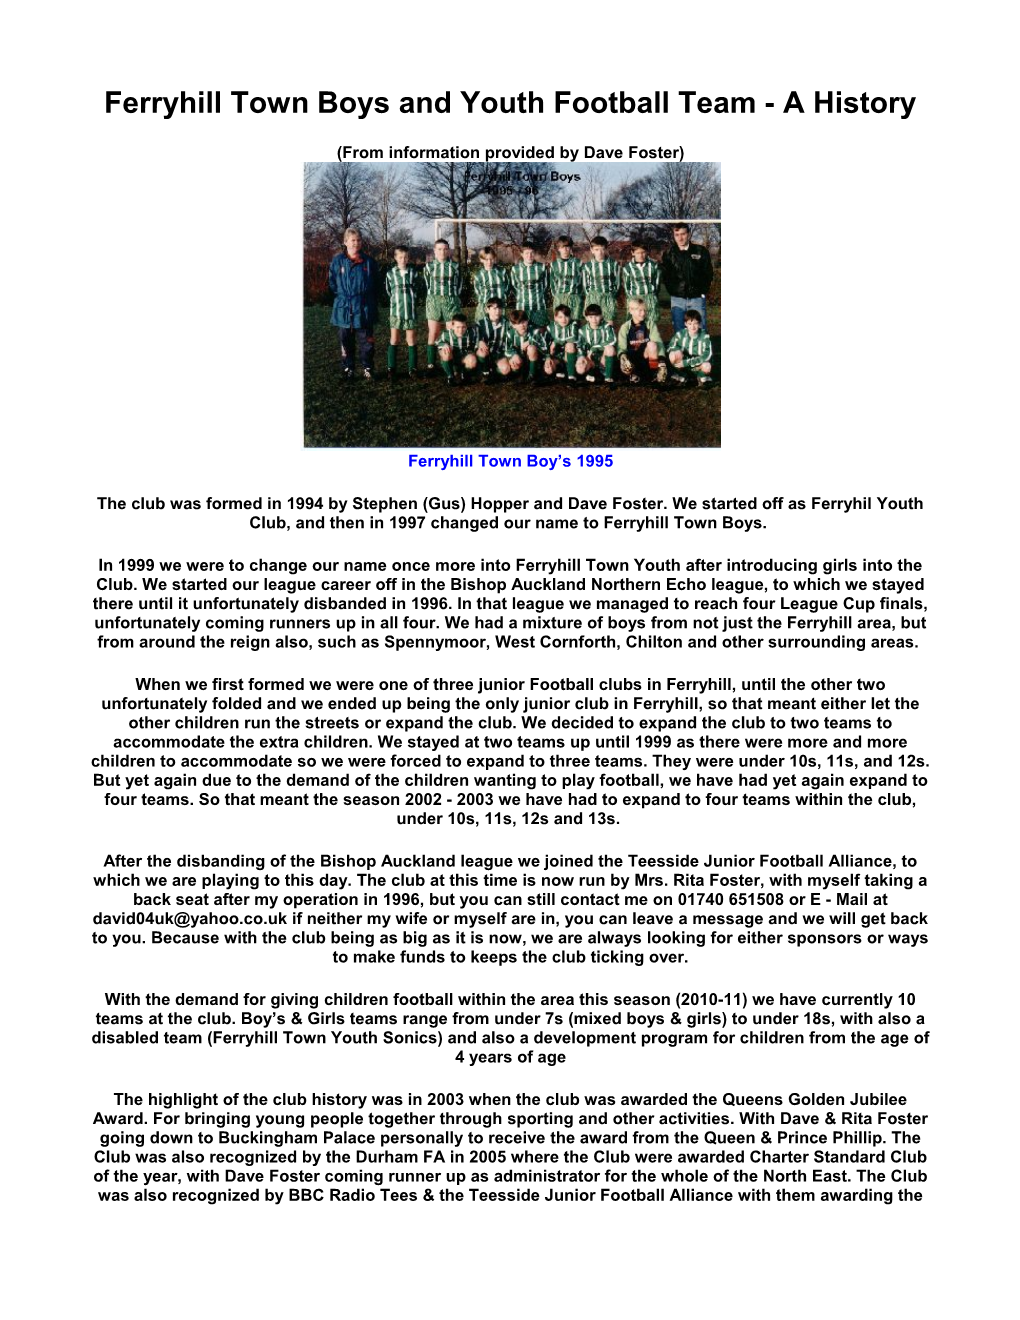 Ferryhill Town Boys and Youth Football Team - a History